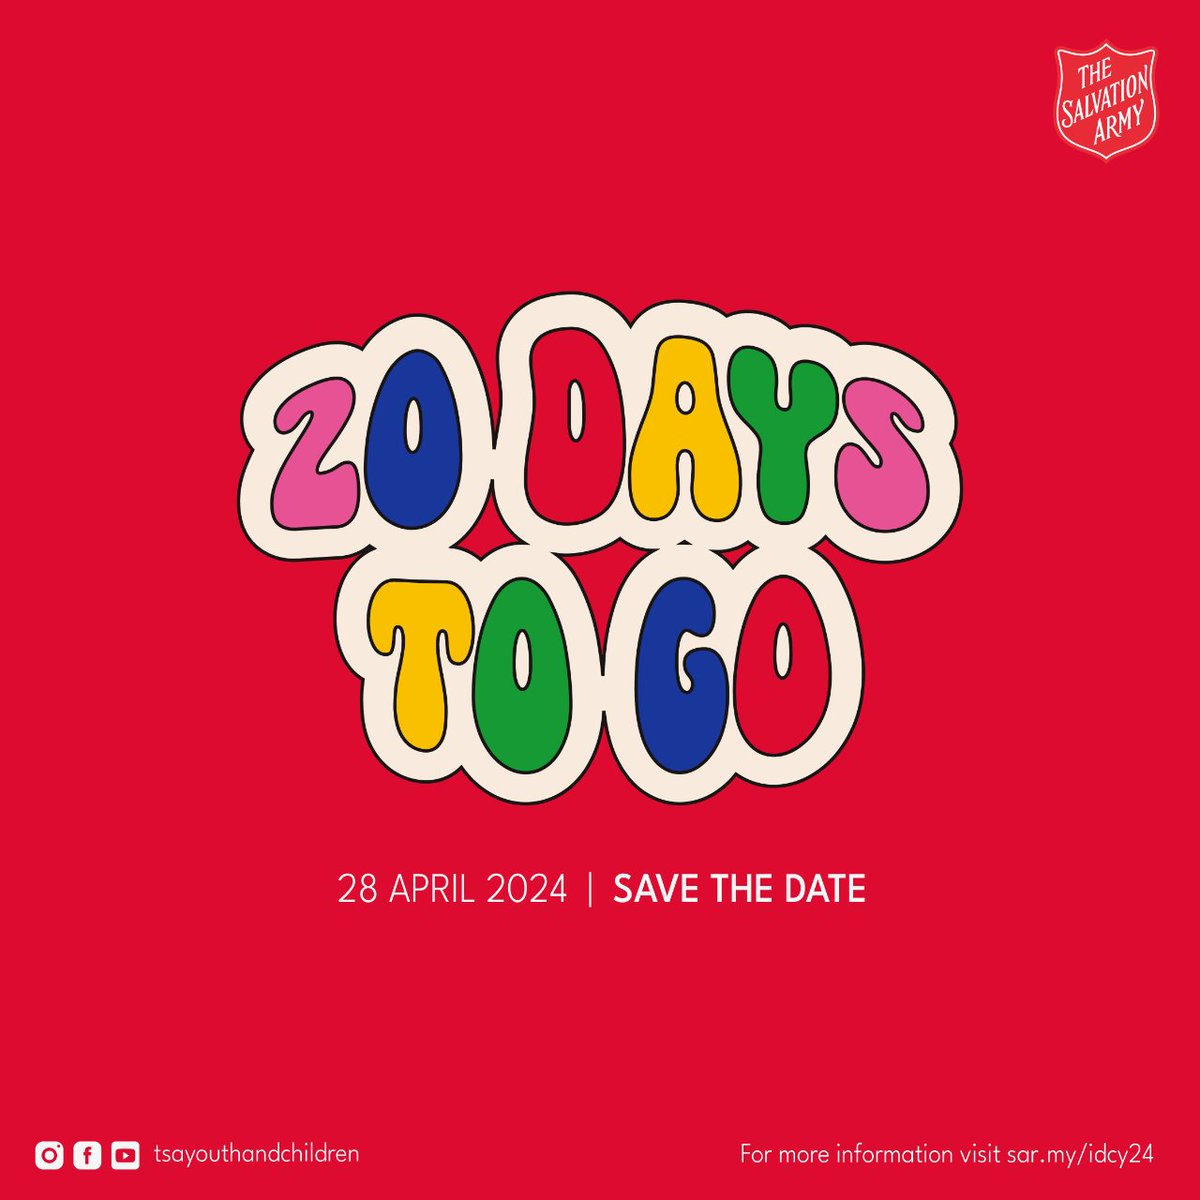 Only 20 days left until we celebrate the International Day of Children and Young People on 28 April 2024 with the theme Grow 🌱  Let’s encourage and empower the younger generations to grow and reach their full potential! Find out more: salvationarmy.org/ihq/idcy24 #idcy24